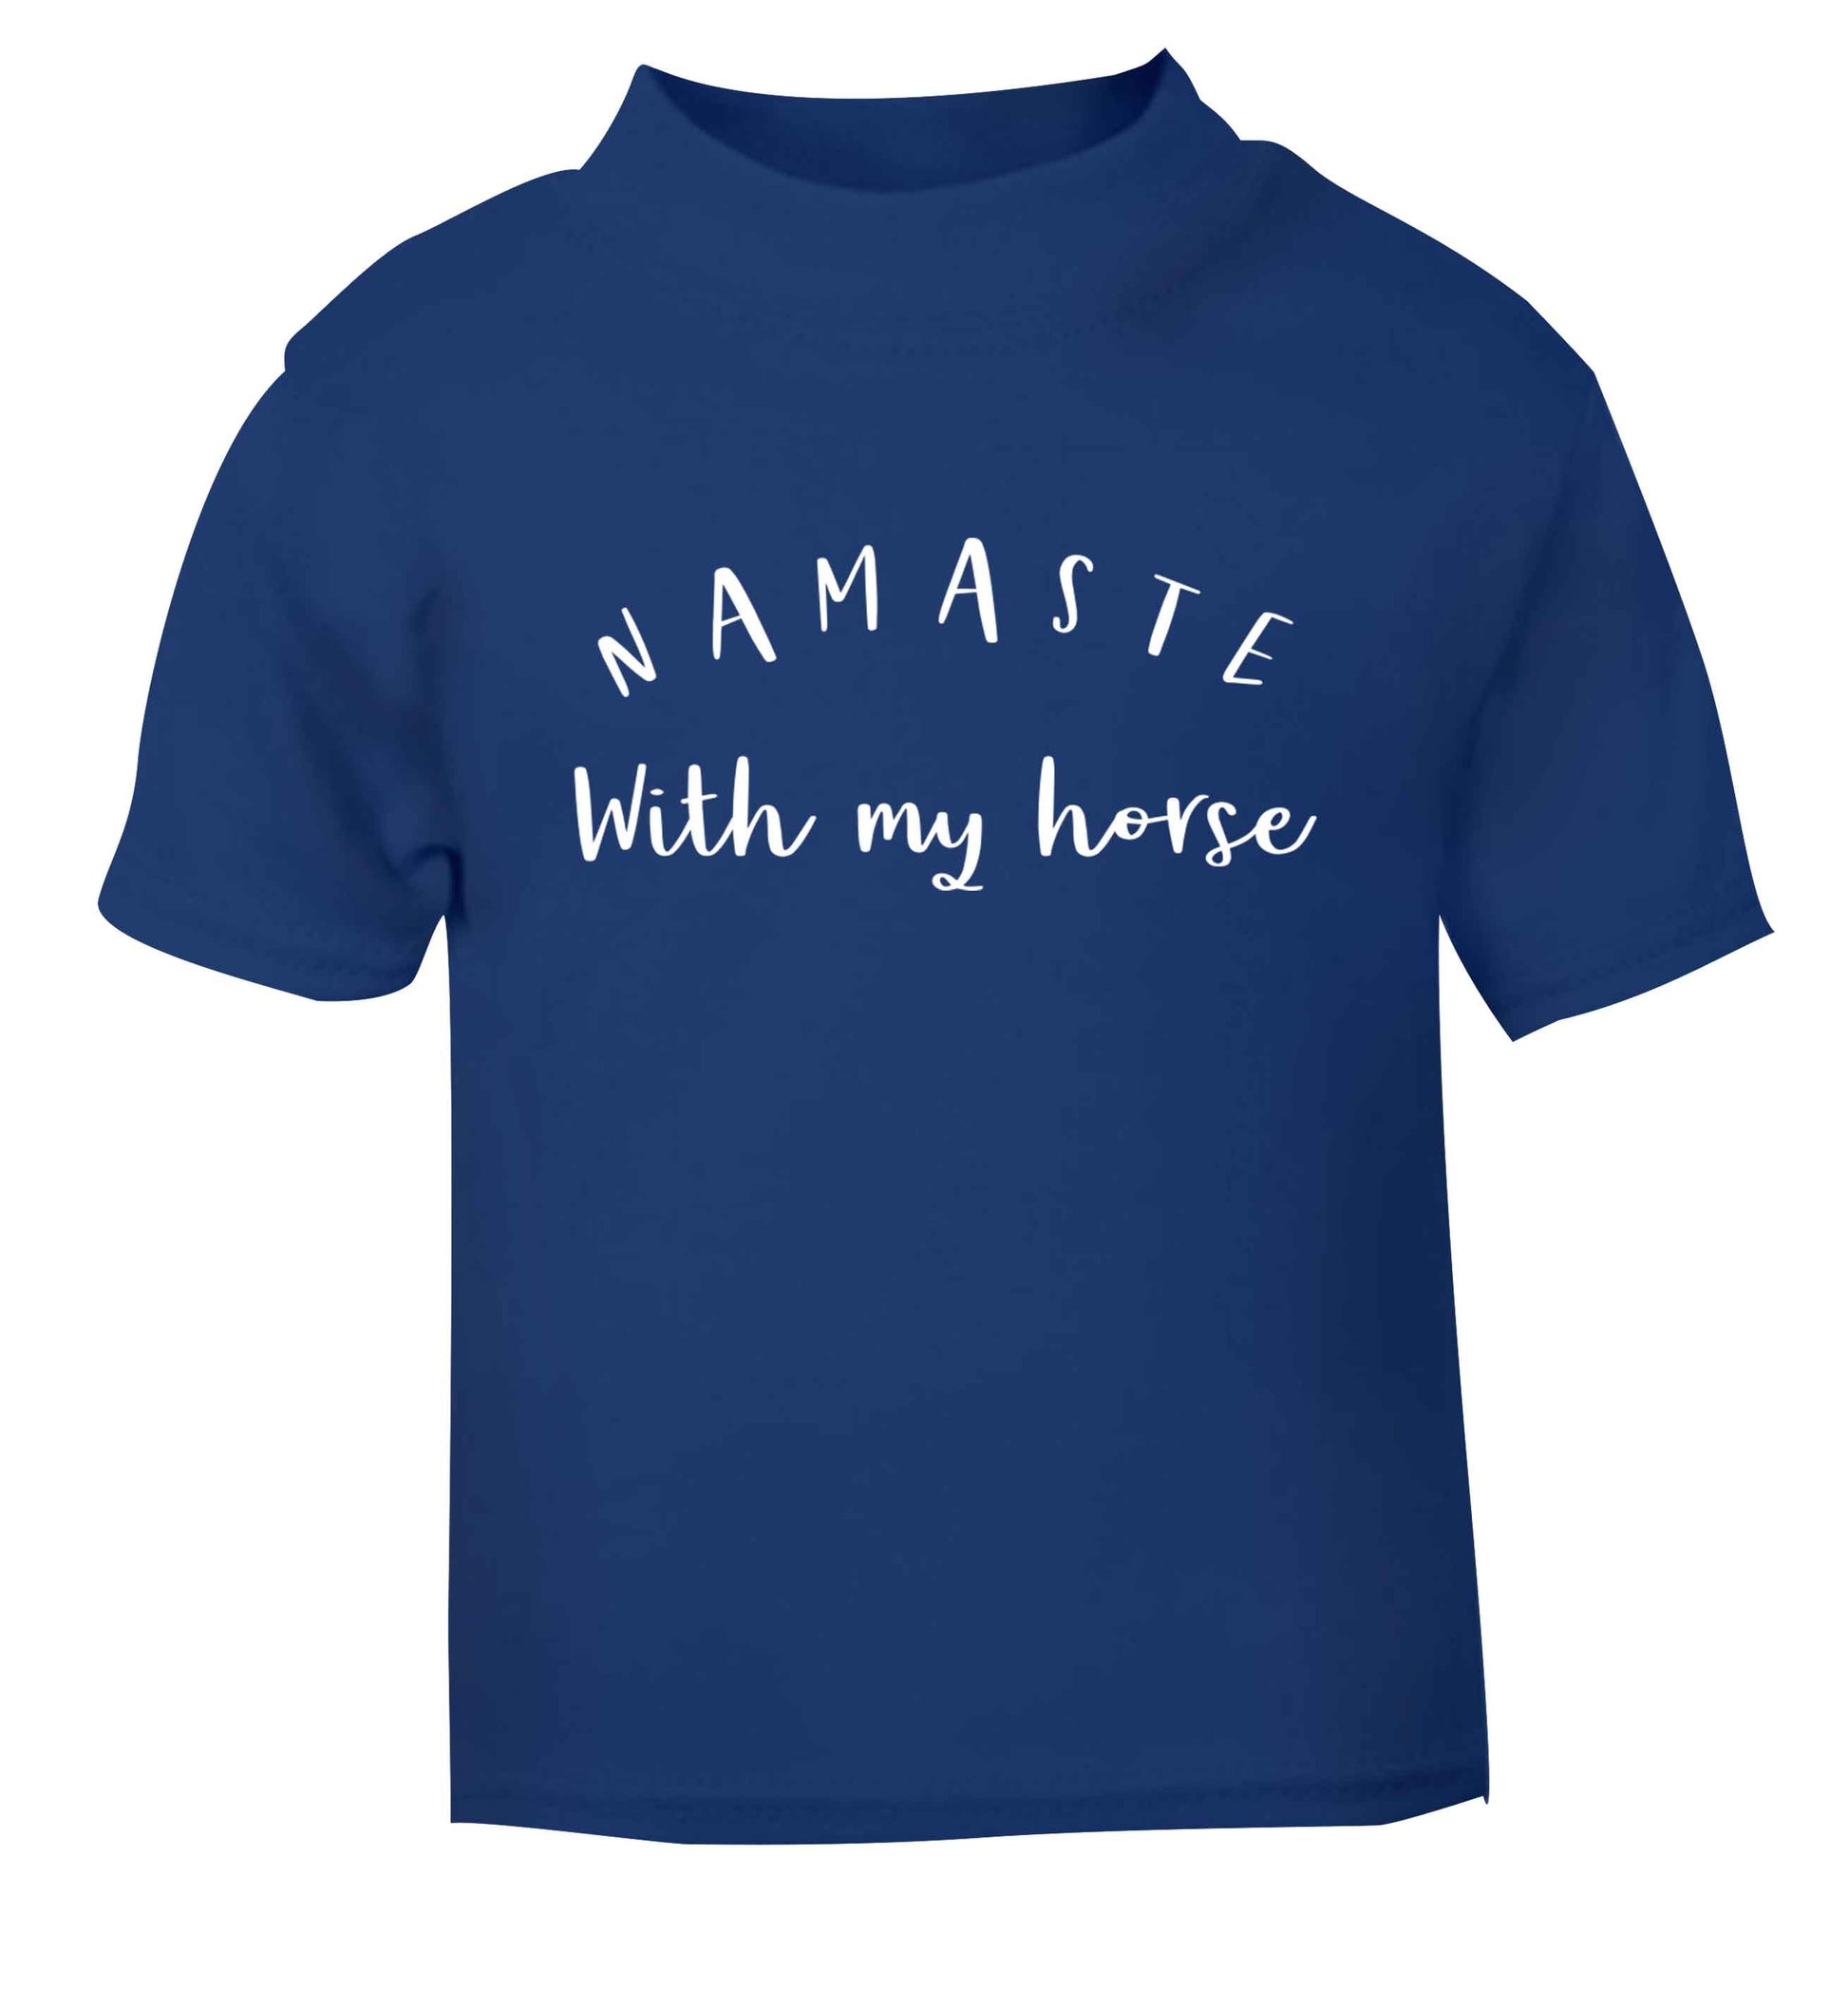 Namaste with my horse blue baby toddler Tshirt 2 Years